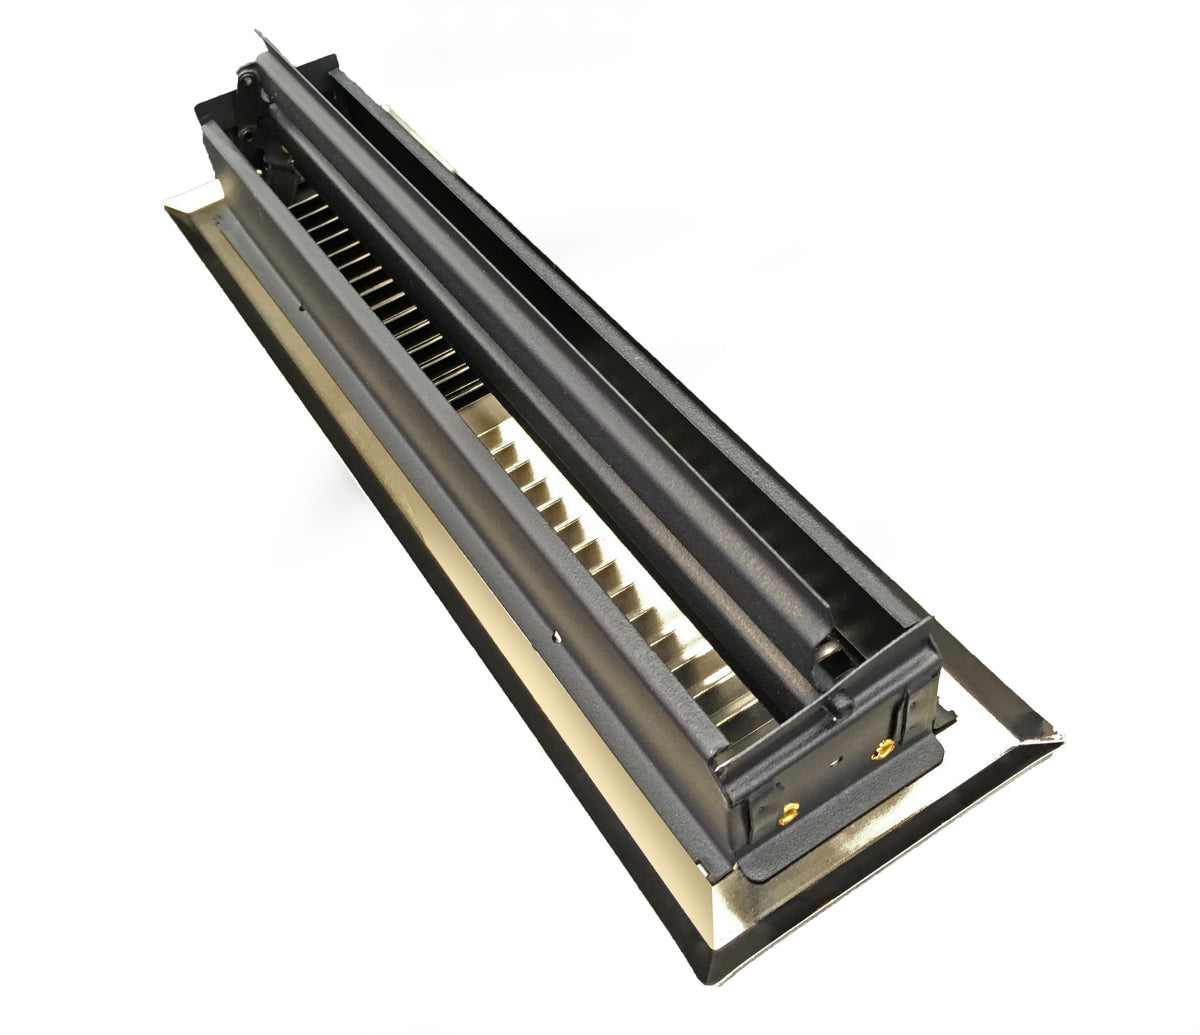 4&quot; X 12&quot; Modern Floor Register Grille With Dampers - Contempo Slotted Grate - HVAC Vent Duct Cover - Polished Brass